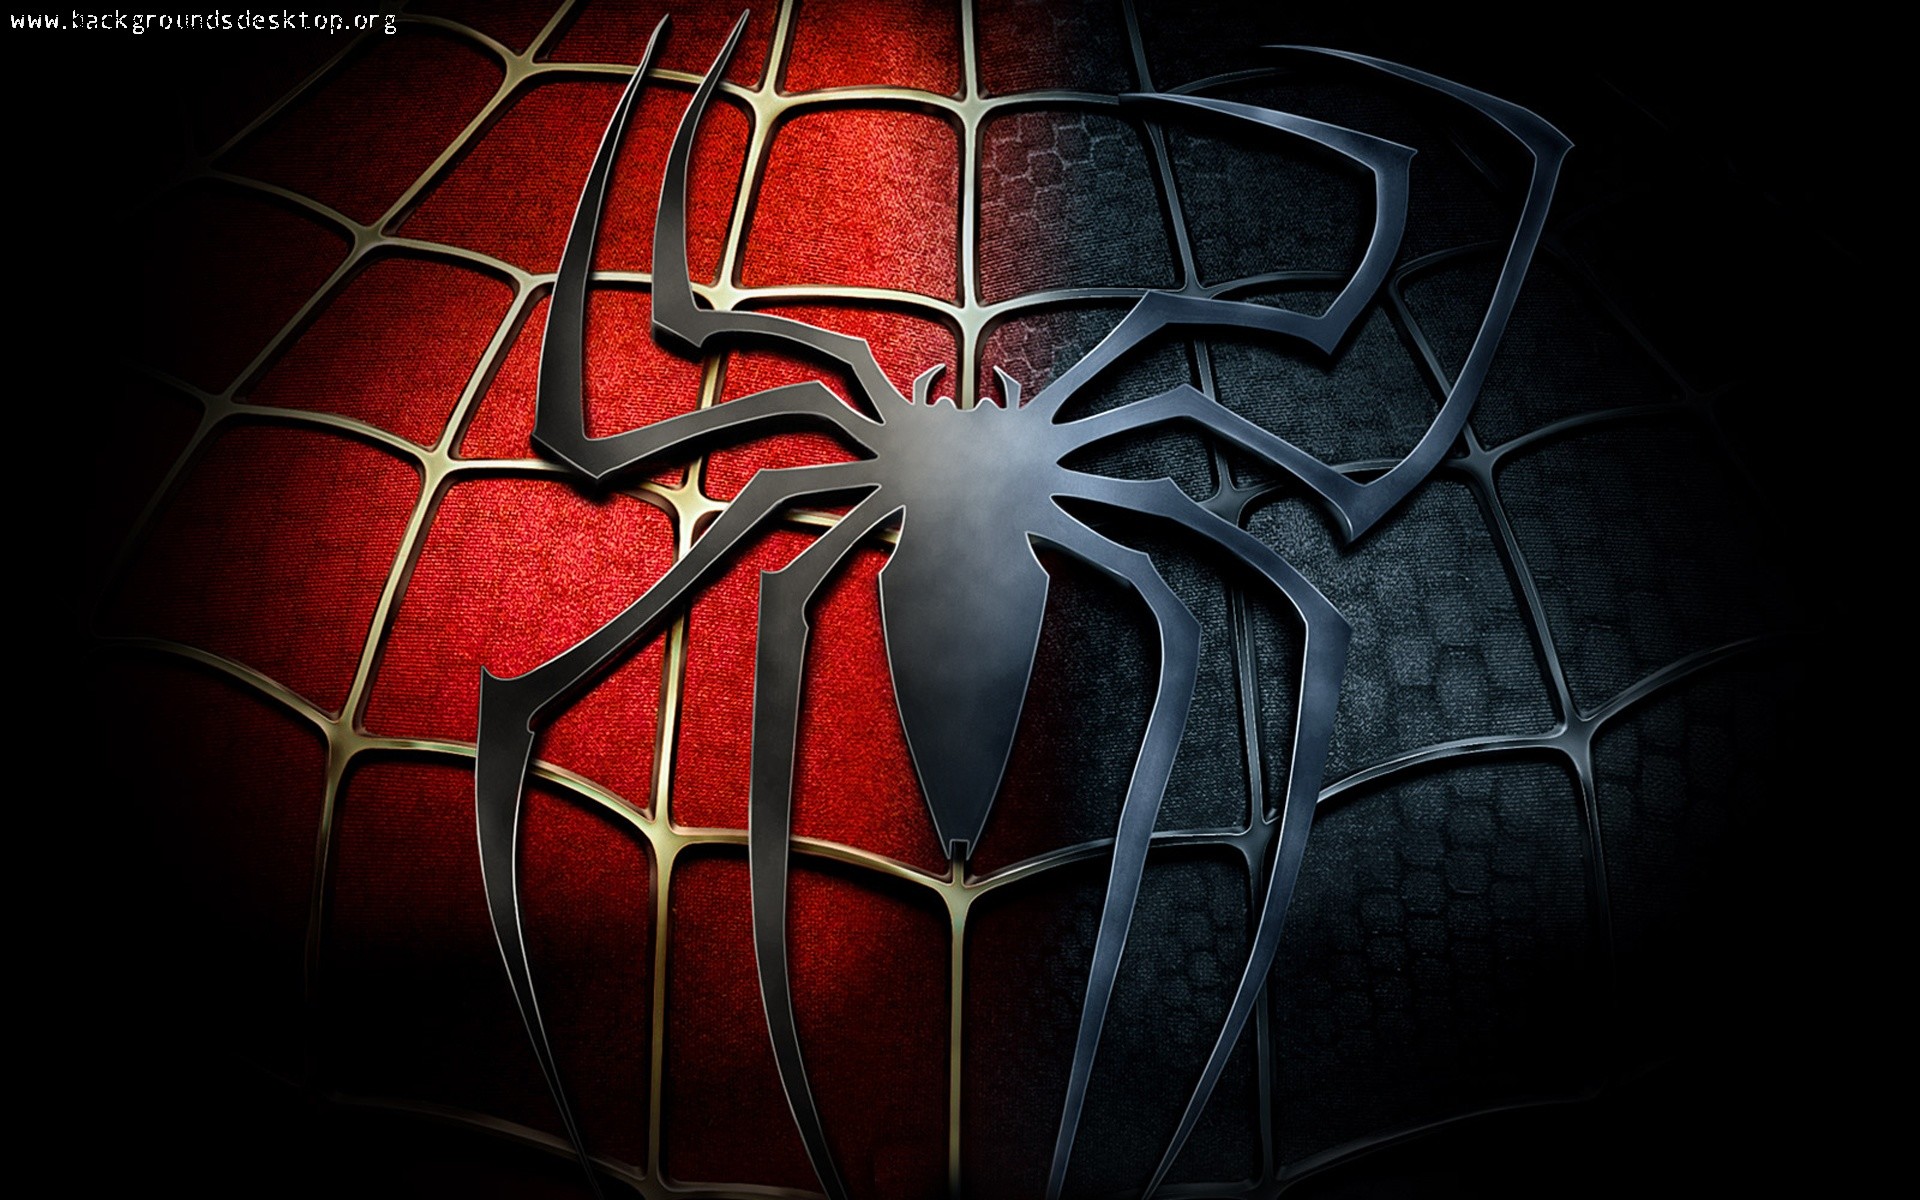 Spiderman logo hd pc wallpapers â hd wallpapers site